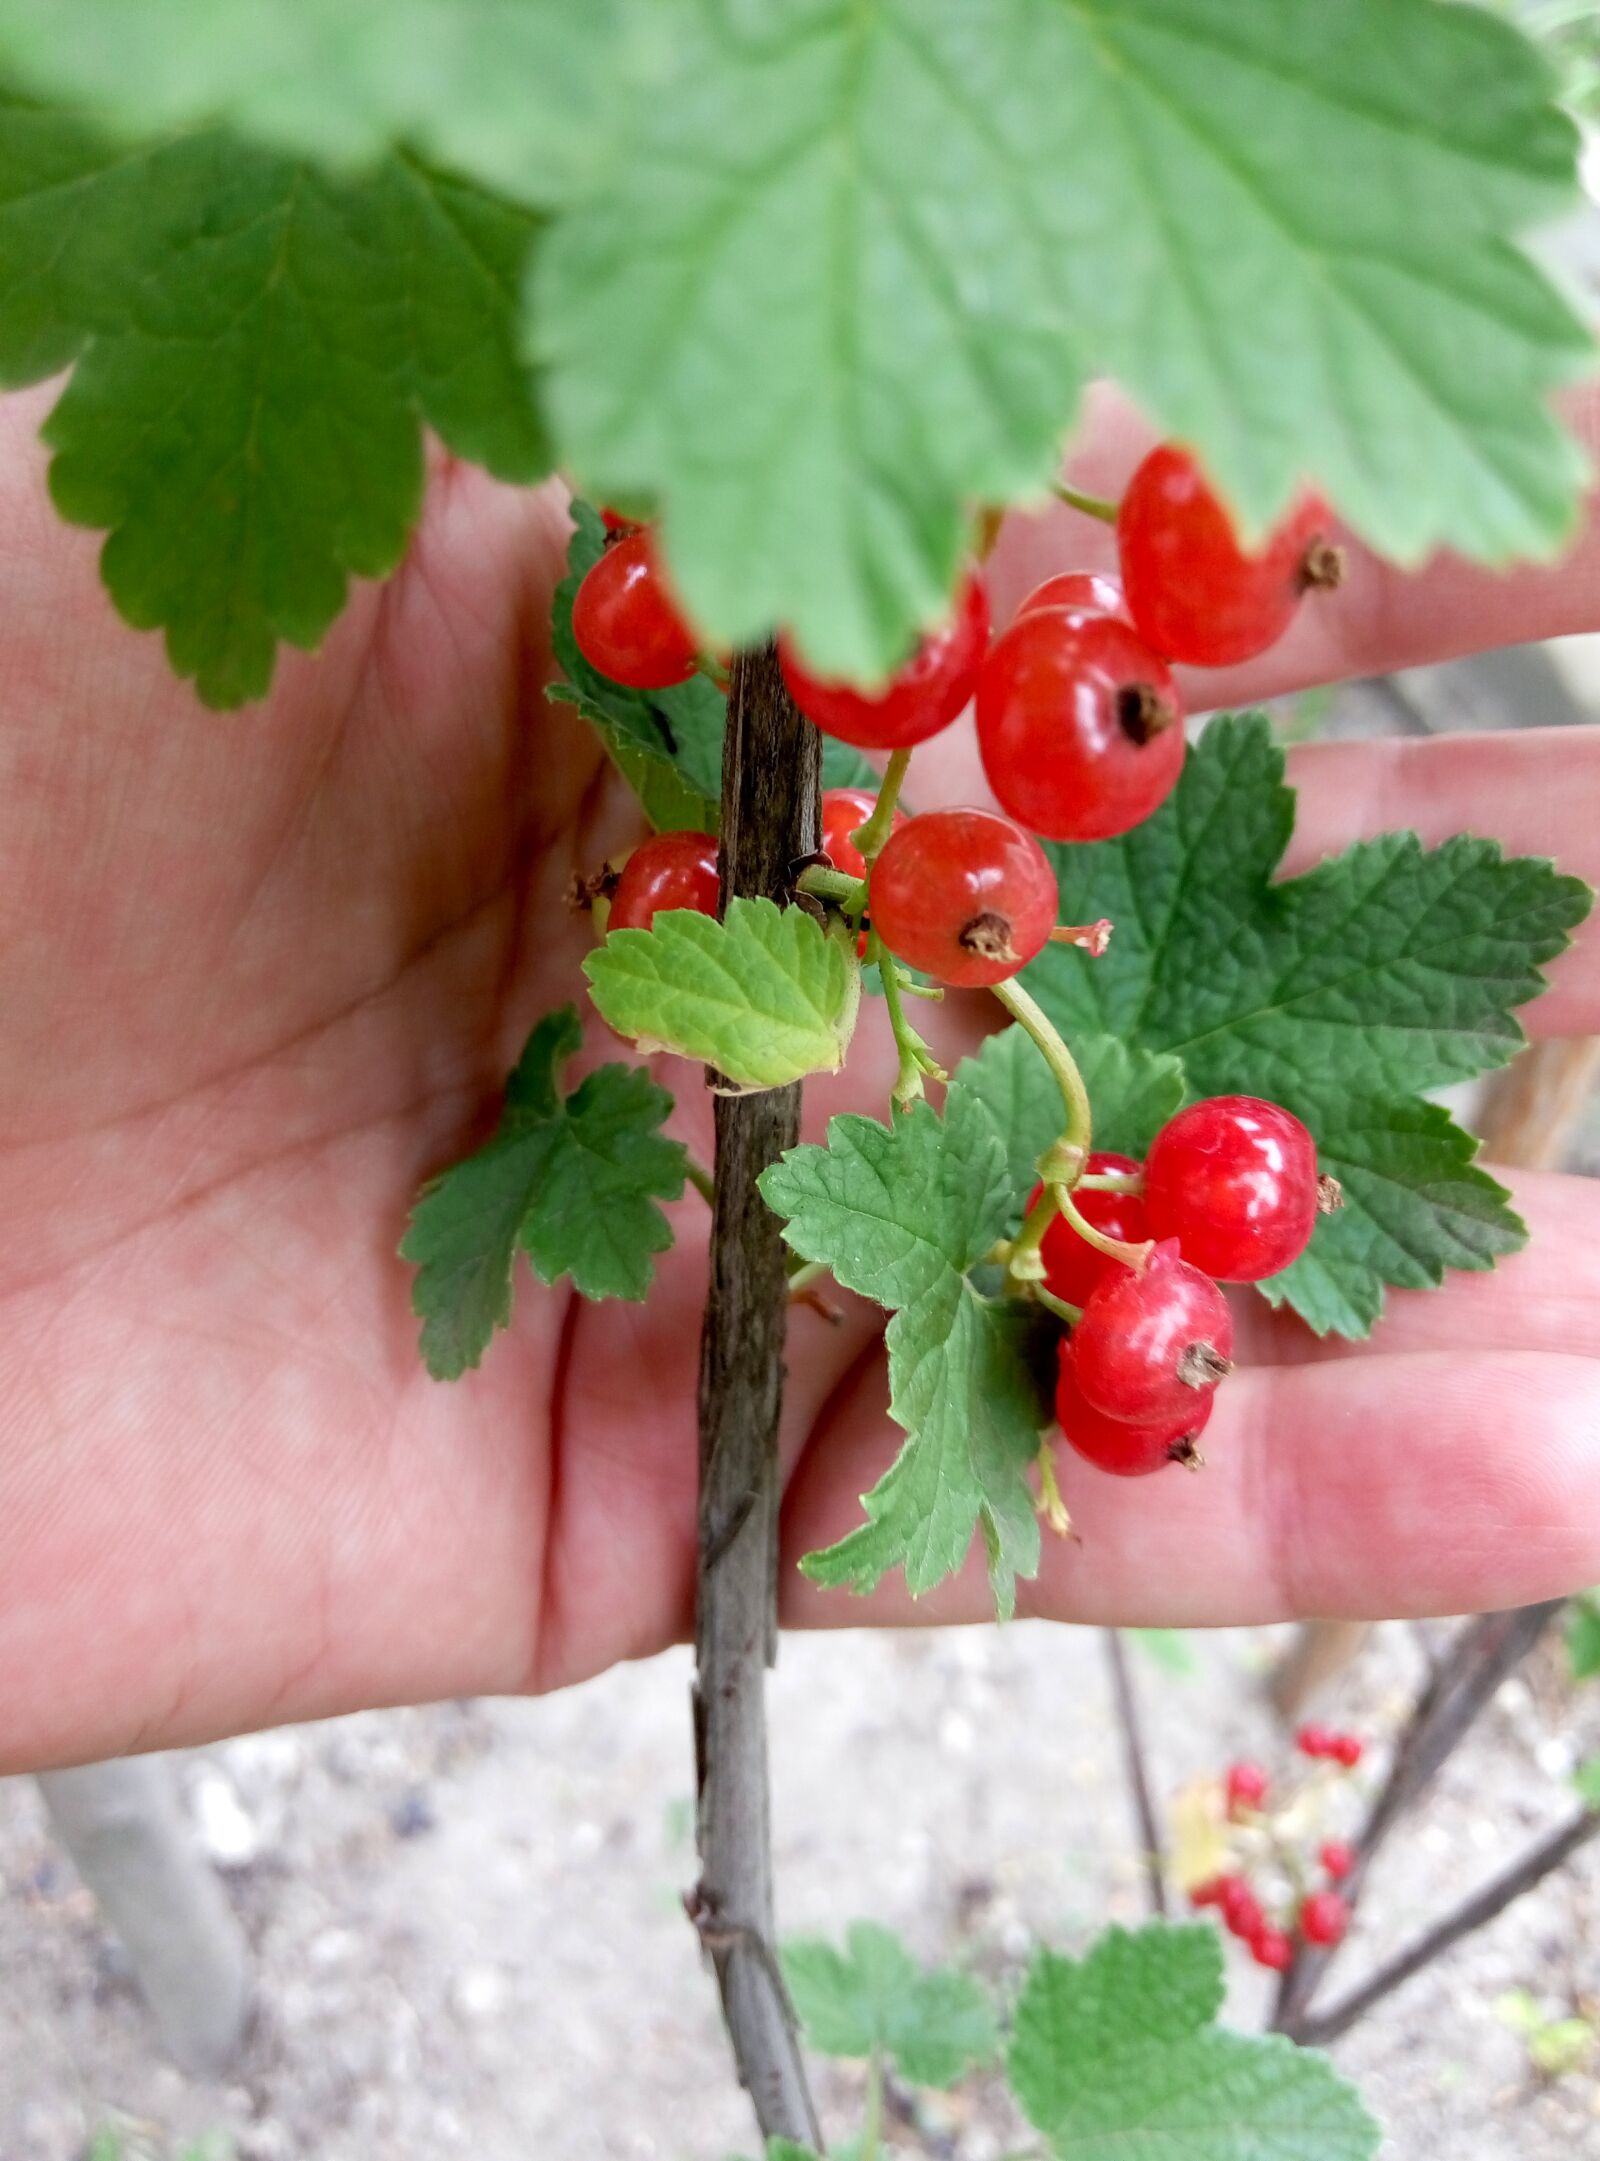 Meizu m2 note sample photo. Red currant, currant, berry photography